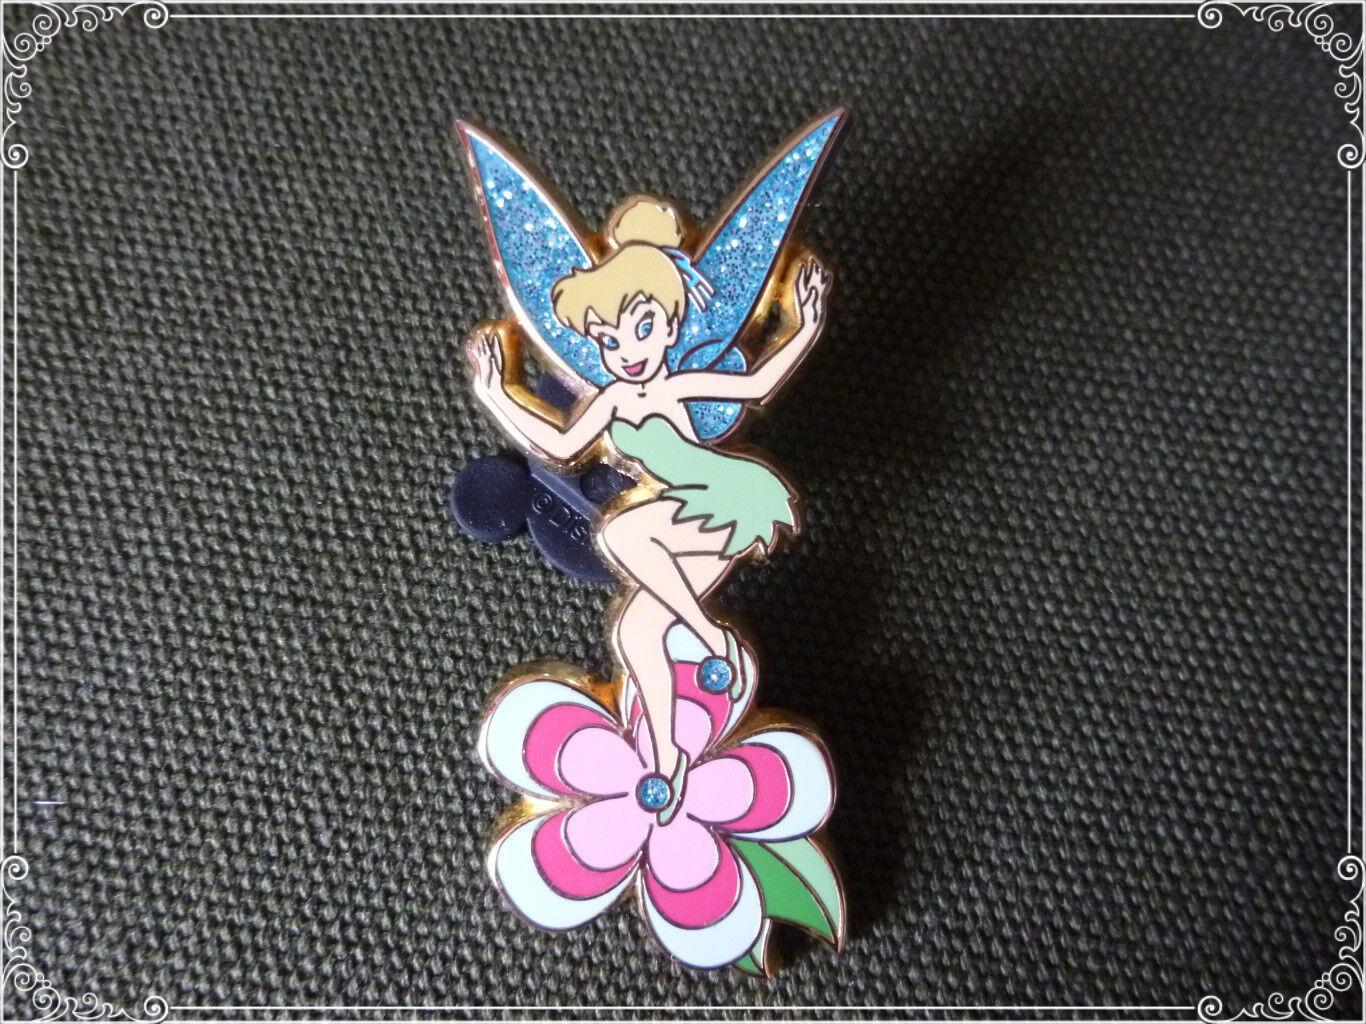 PIN FAIRIES DISNEY TINKER BELL WITH FLOWERS TINK LANDING WINGS GLITTER DLR PARIS